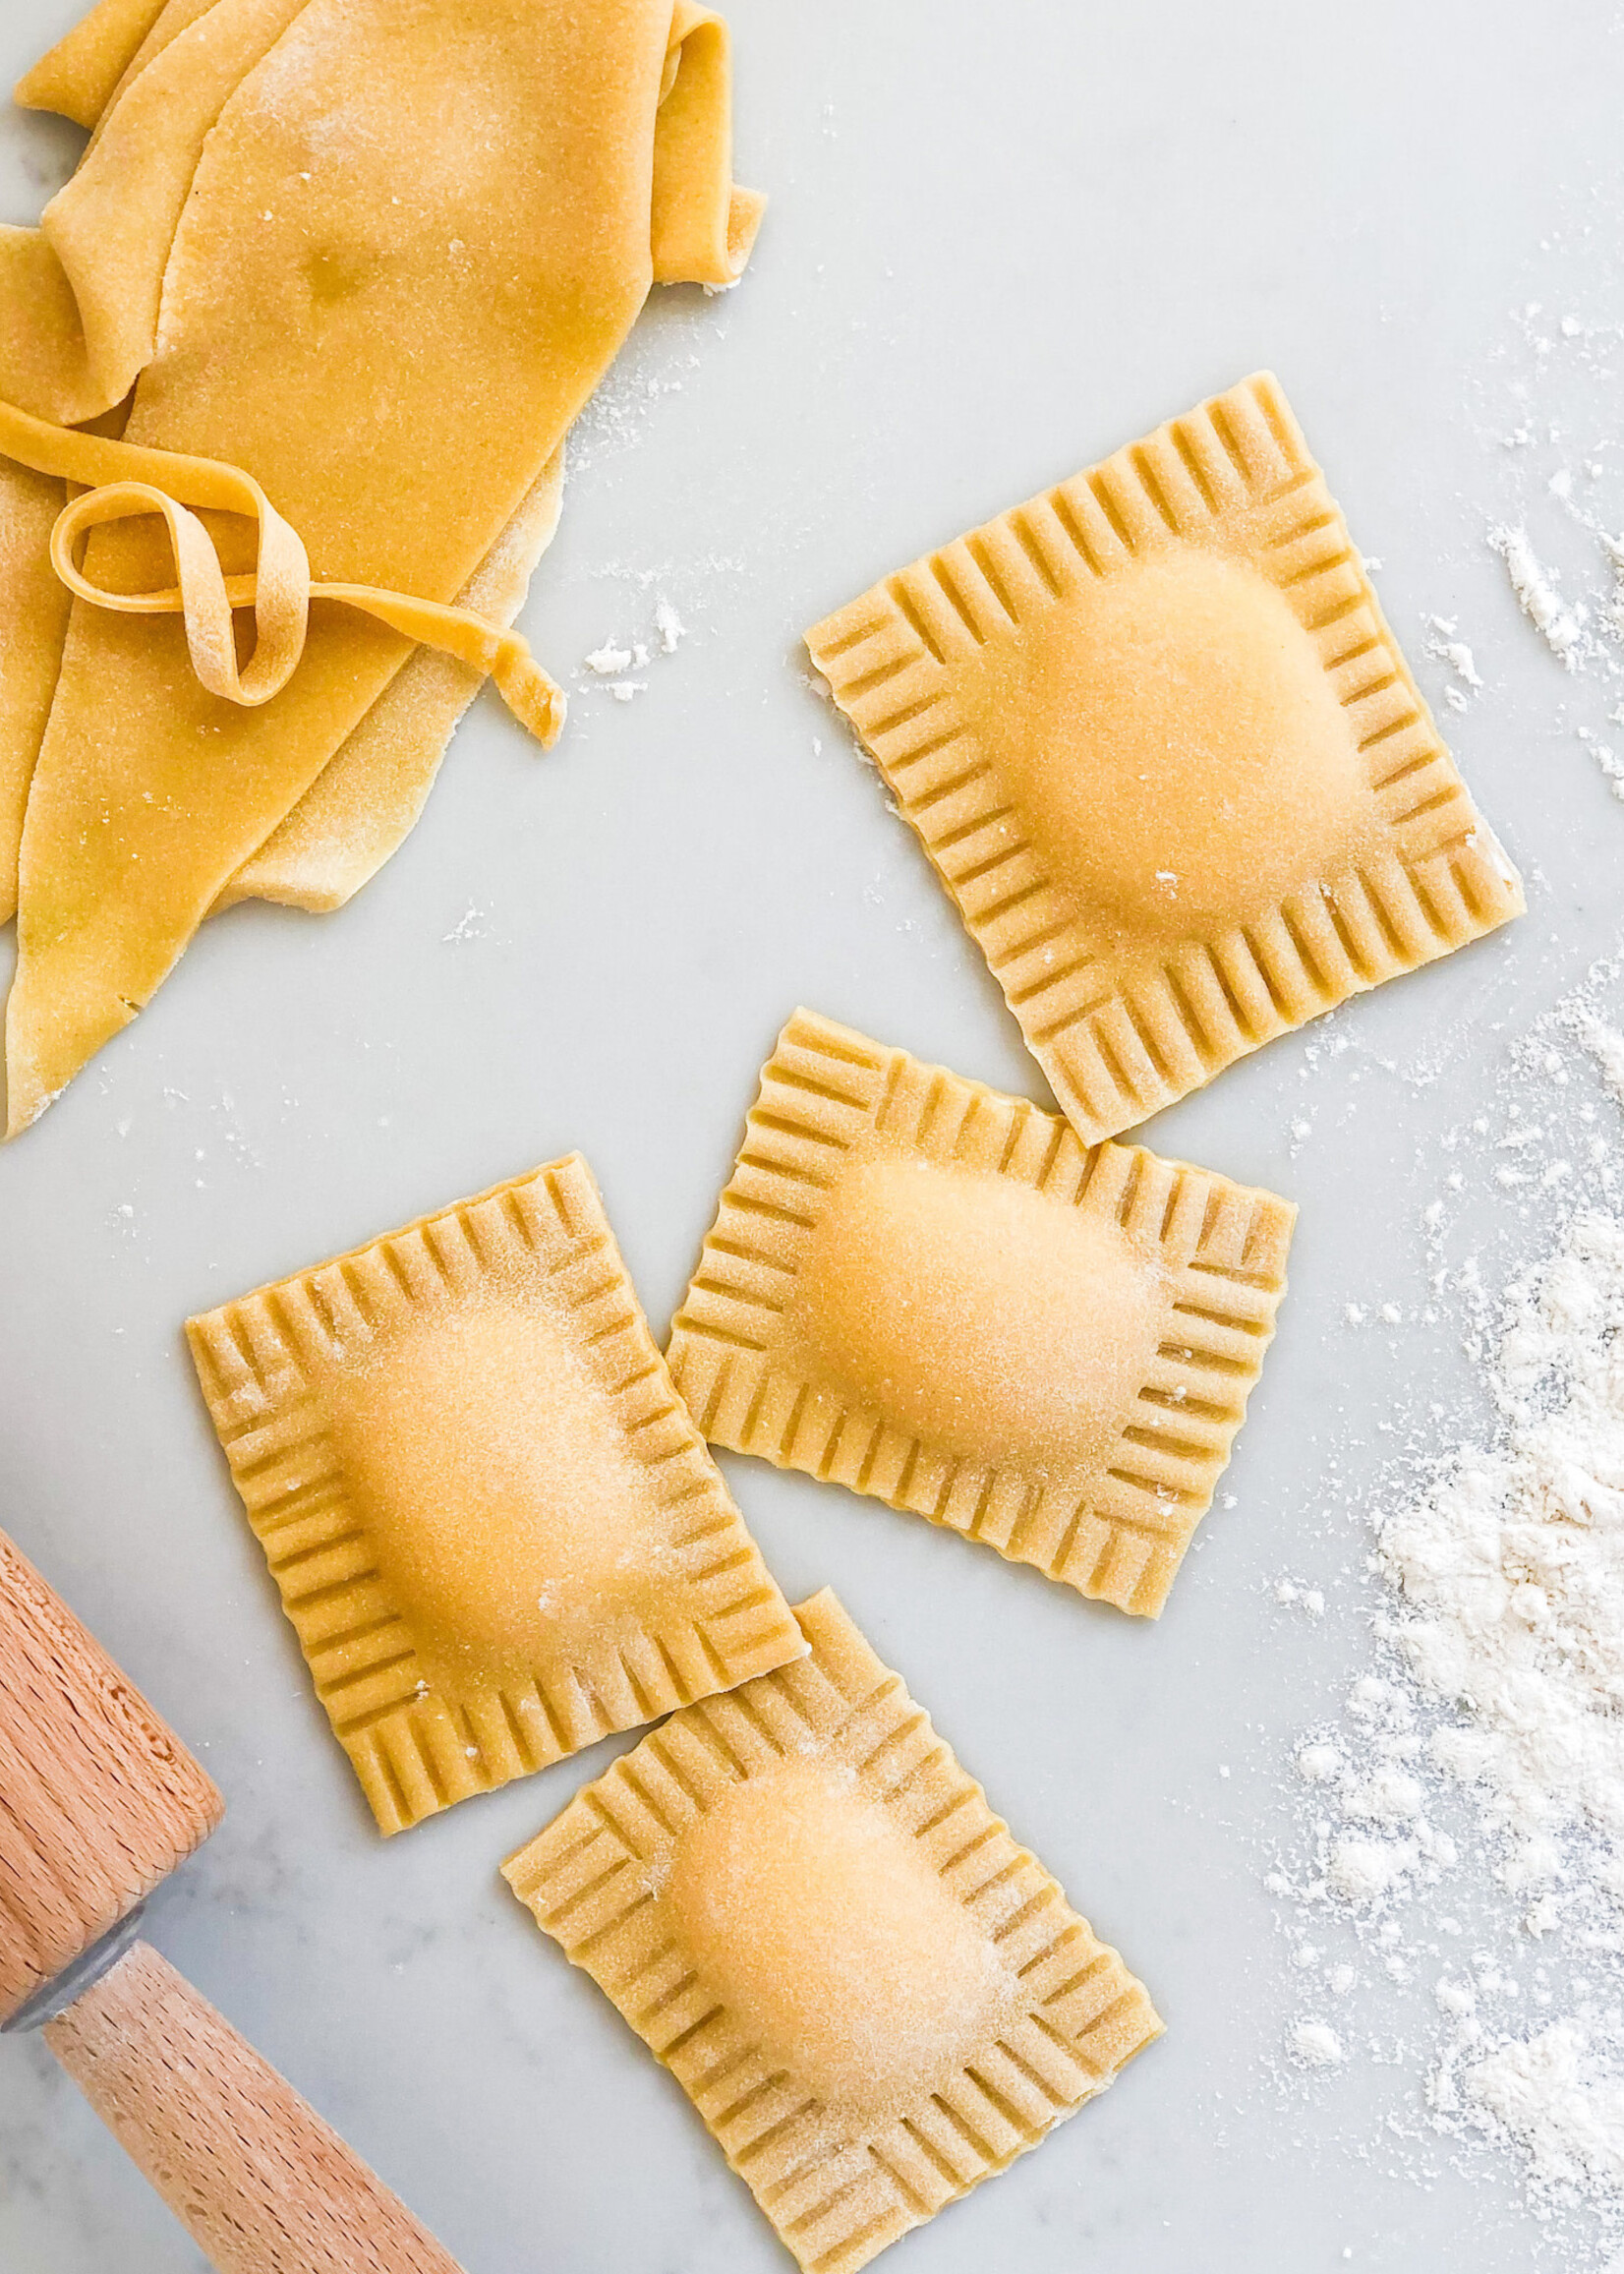 09/20/22 Fall In Love With Pasta (Workshop) / SOLD OUT